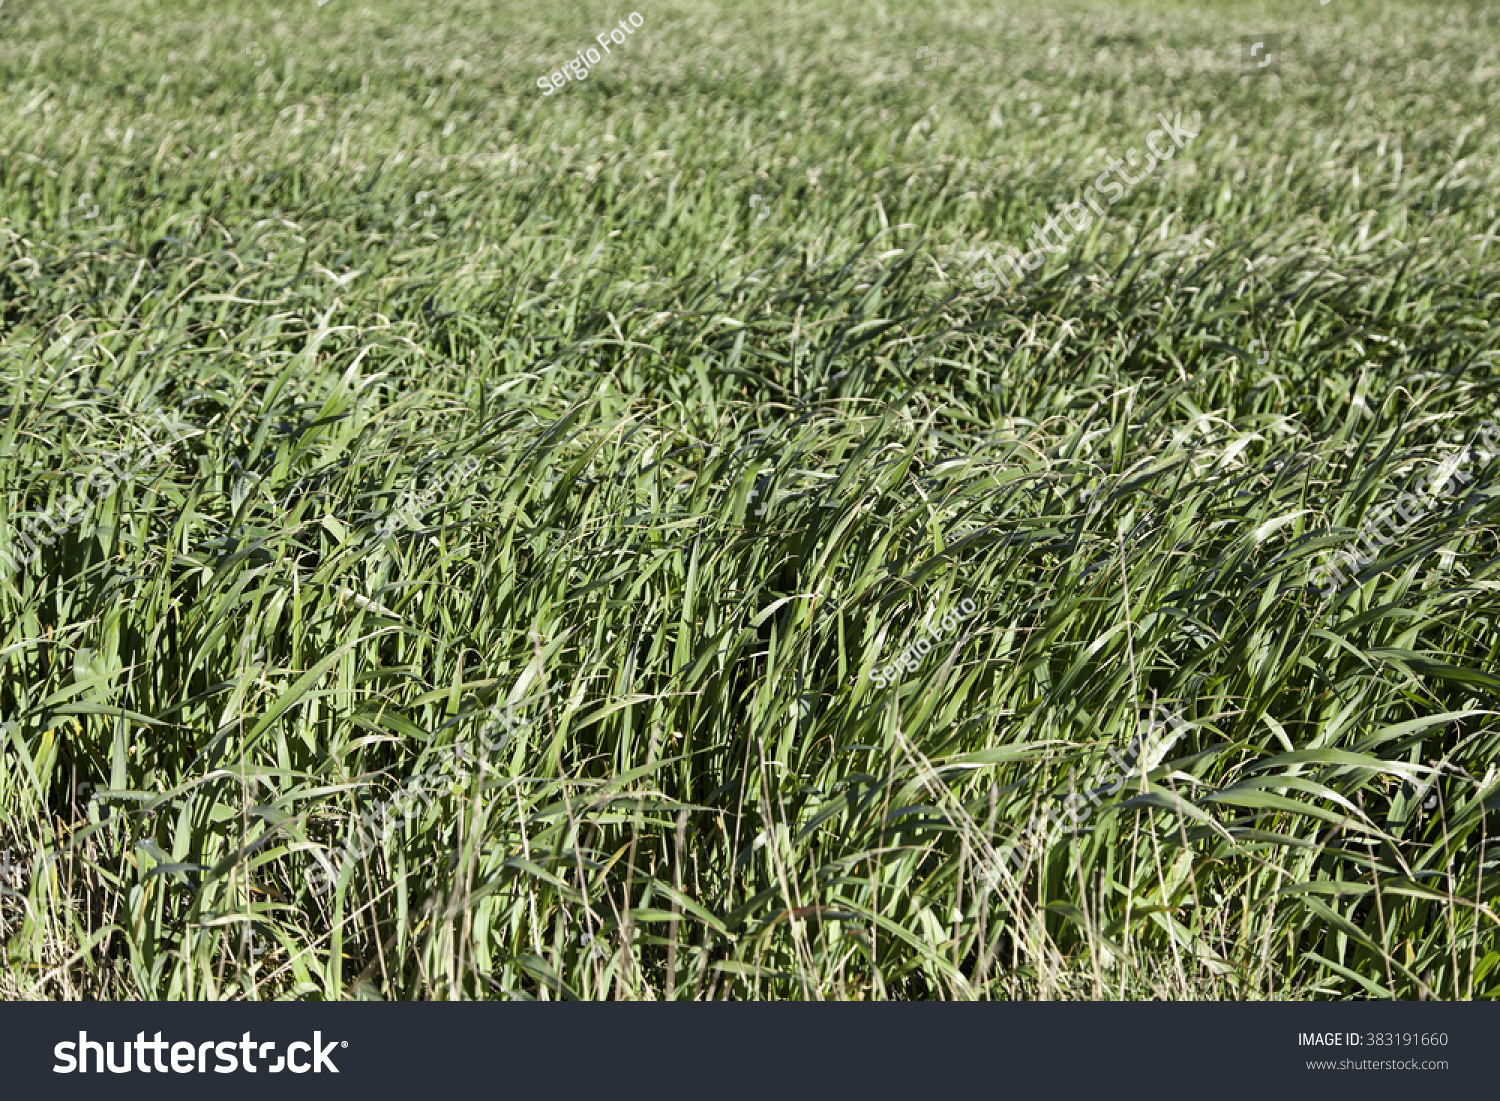 Background of fresh grass, detail of a field in nature #383191660